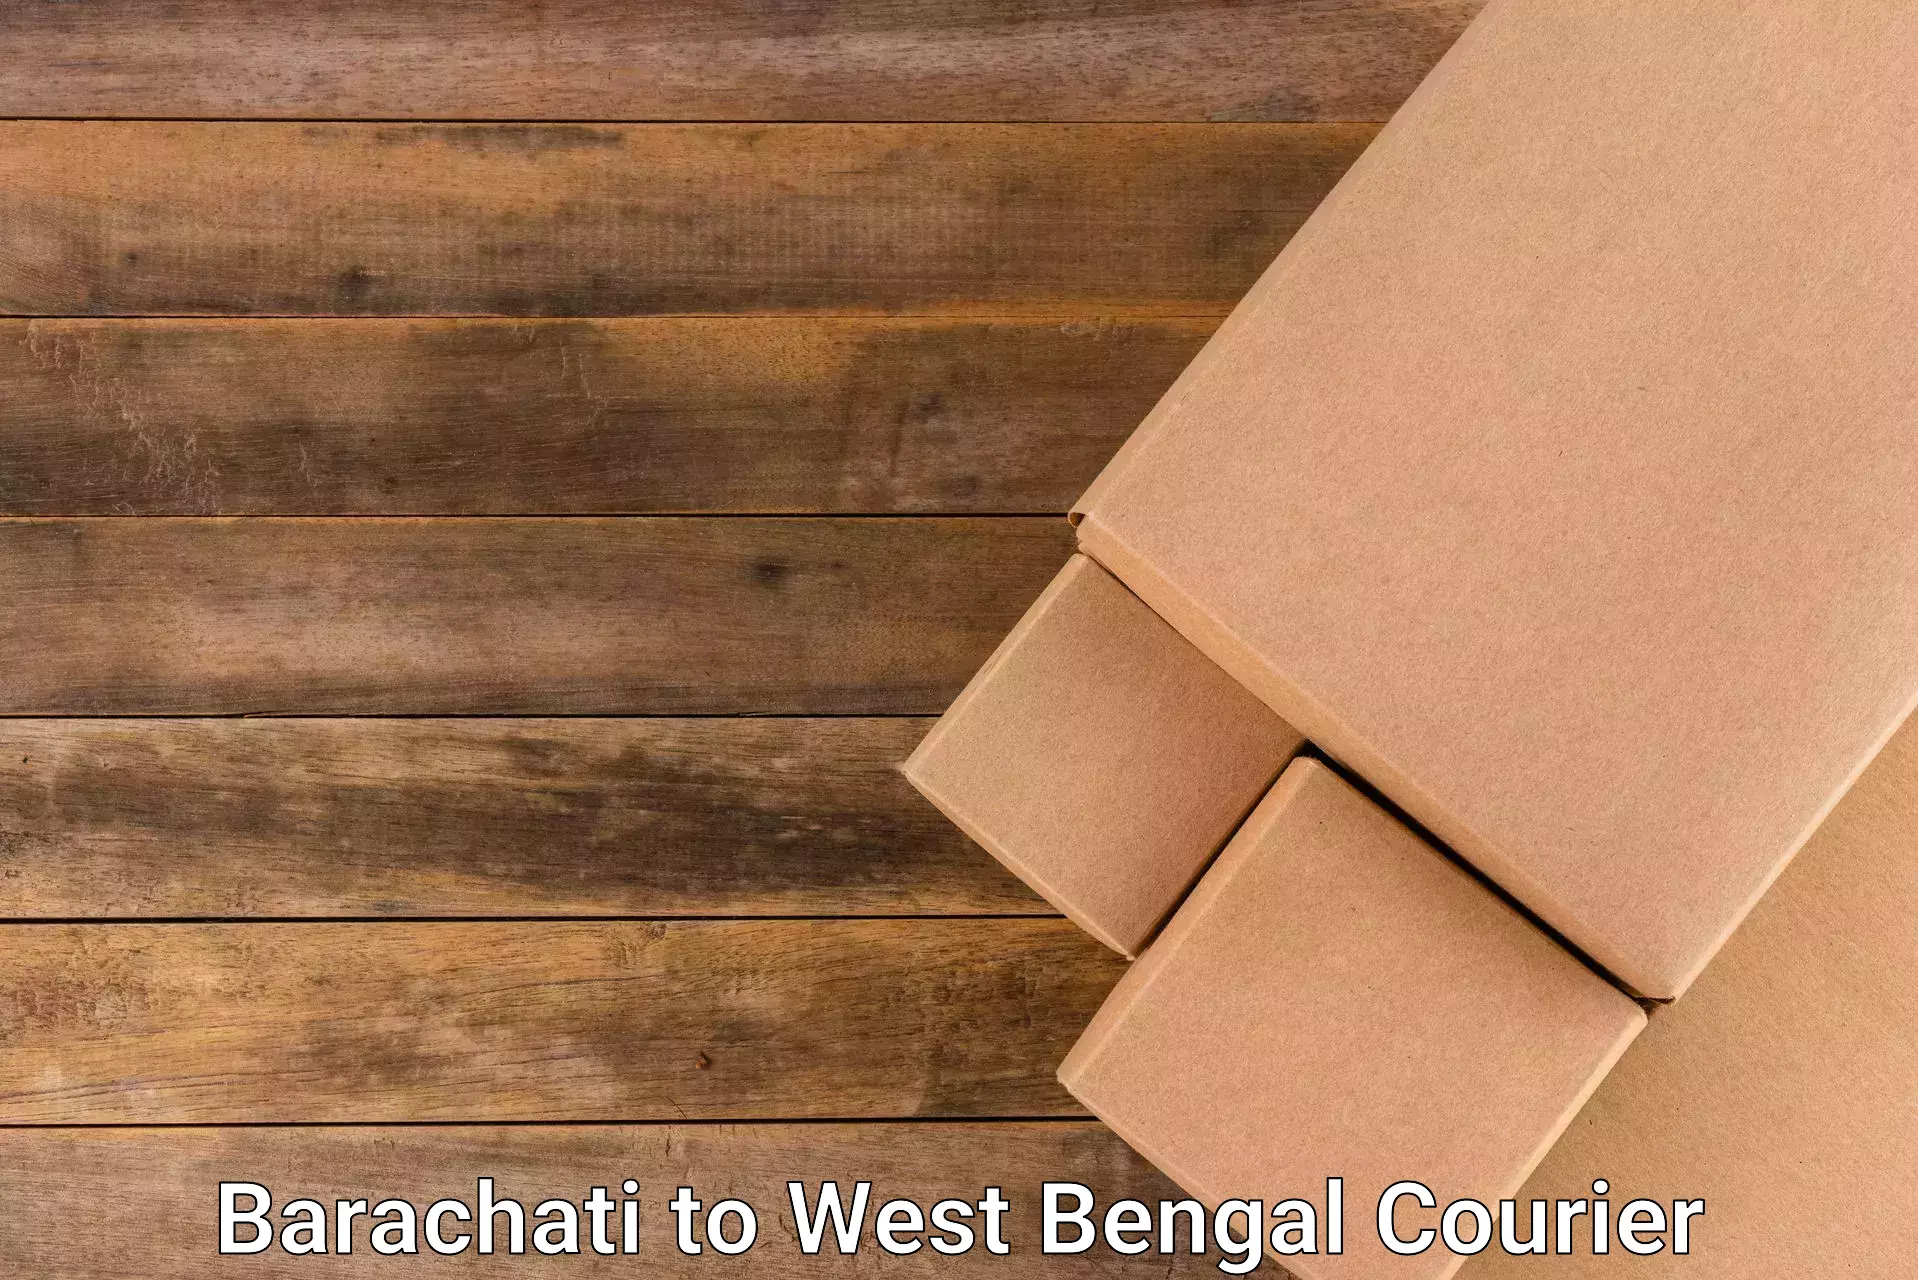 Easy access courier services Barachati to Barasat